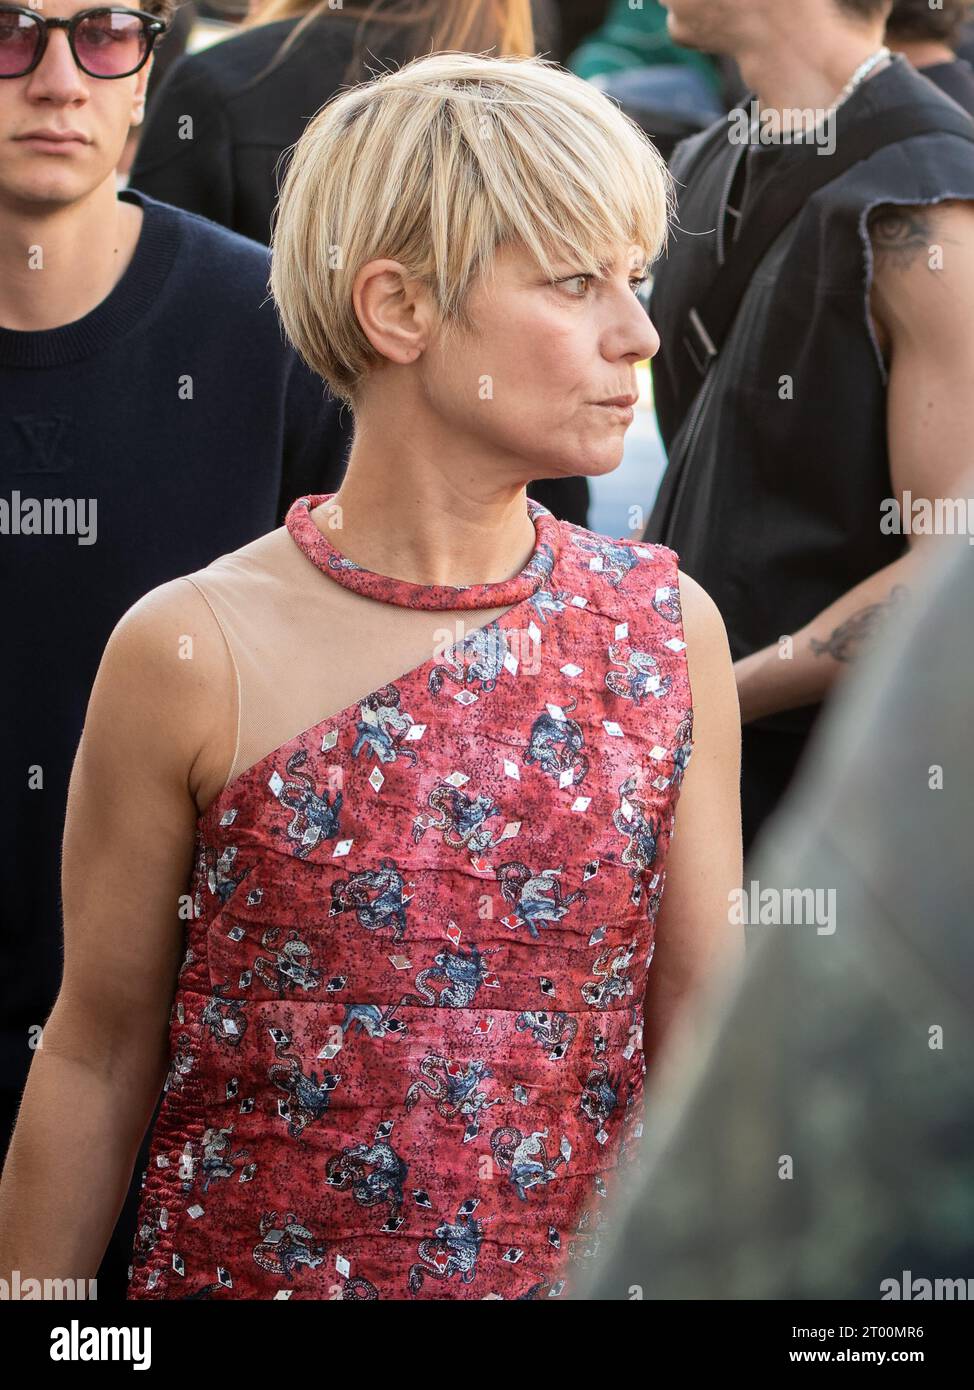 Paris, France. 02nd Oct, 2023. French actress Marina Foïs at the Louis Vuitton womenswear Spring/Summer 2024 show as part of PARIS FASHION WEEK - OCTOBER 02 2023 Credit: Jacques Julien/Alamy Live News Credit: Jacques Julien/Alamy Live News Stock Photo